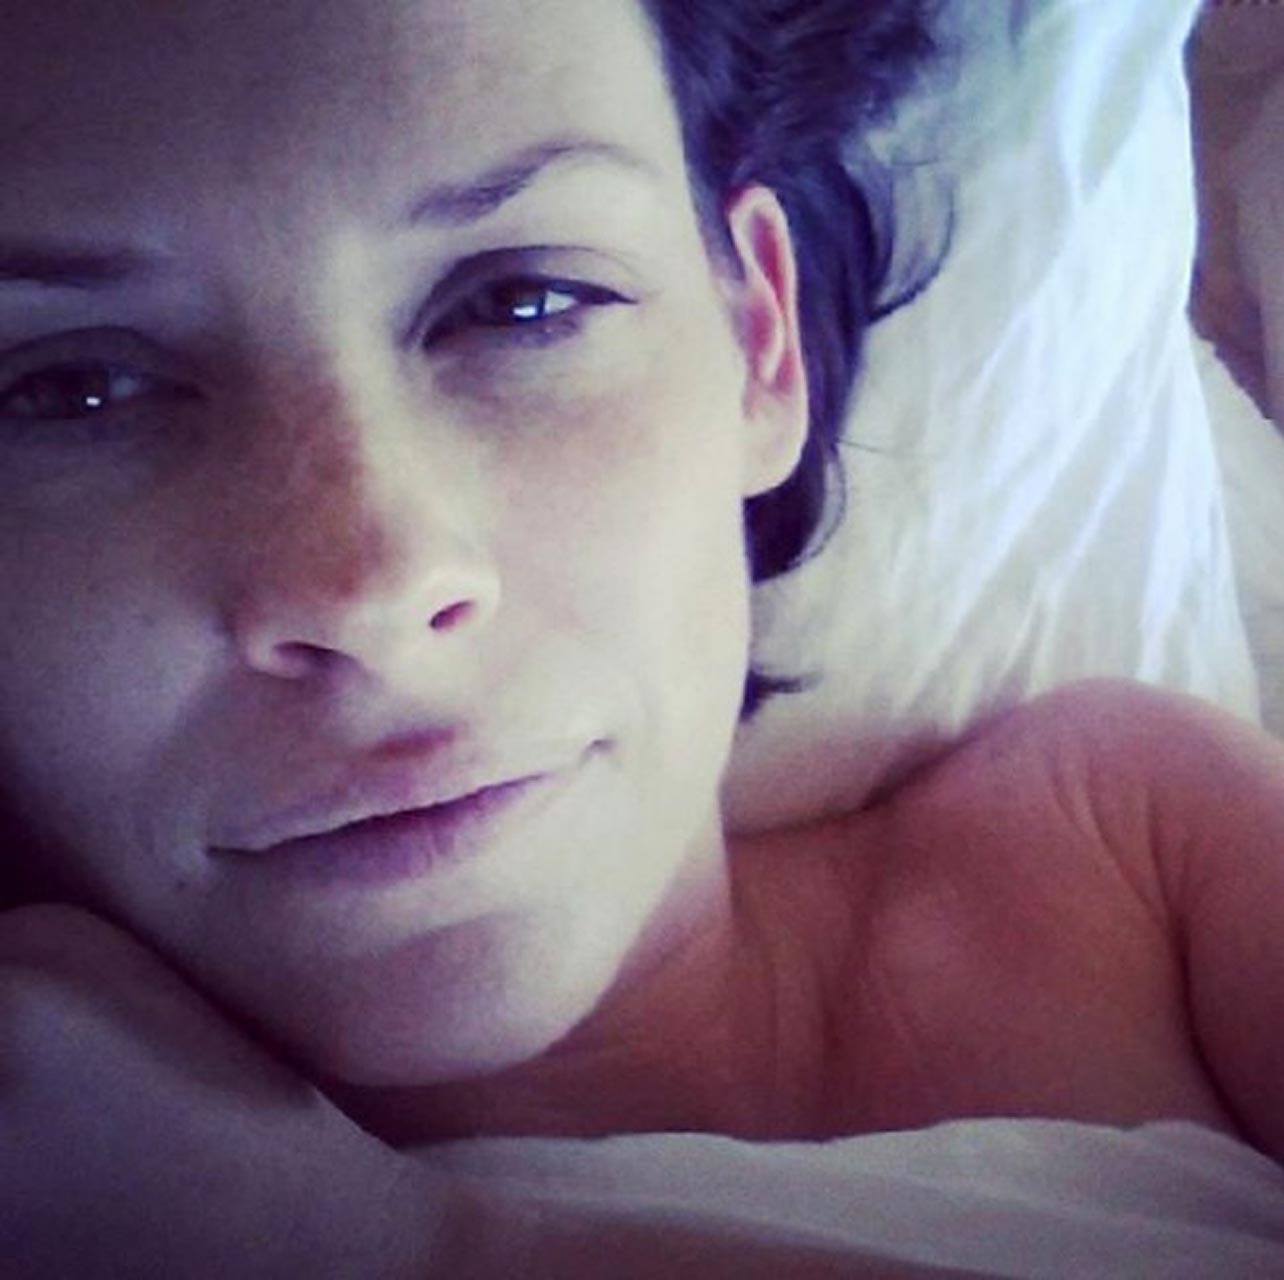 Nude evangeline pictures lilly Evangeline Lilly